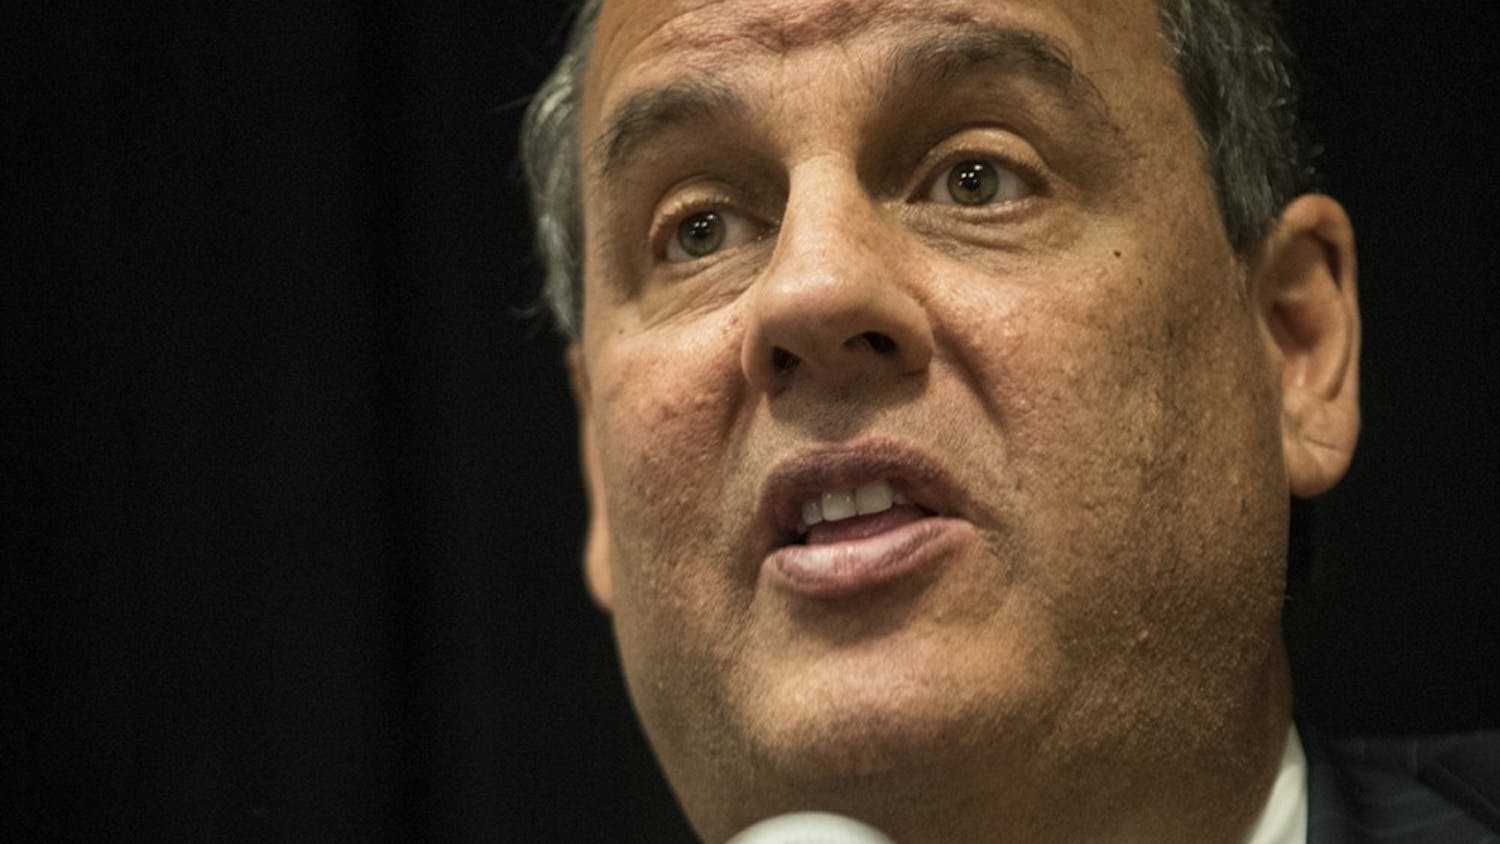 New Jersey Gov. Chris Christie speaks at a press conference Monday at the Sheraton Hotel in Indianapolis. Christie was the keynote speaker at the Eighth Annual Prescription Drug Abuse Symposium.